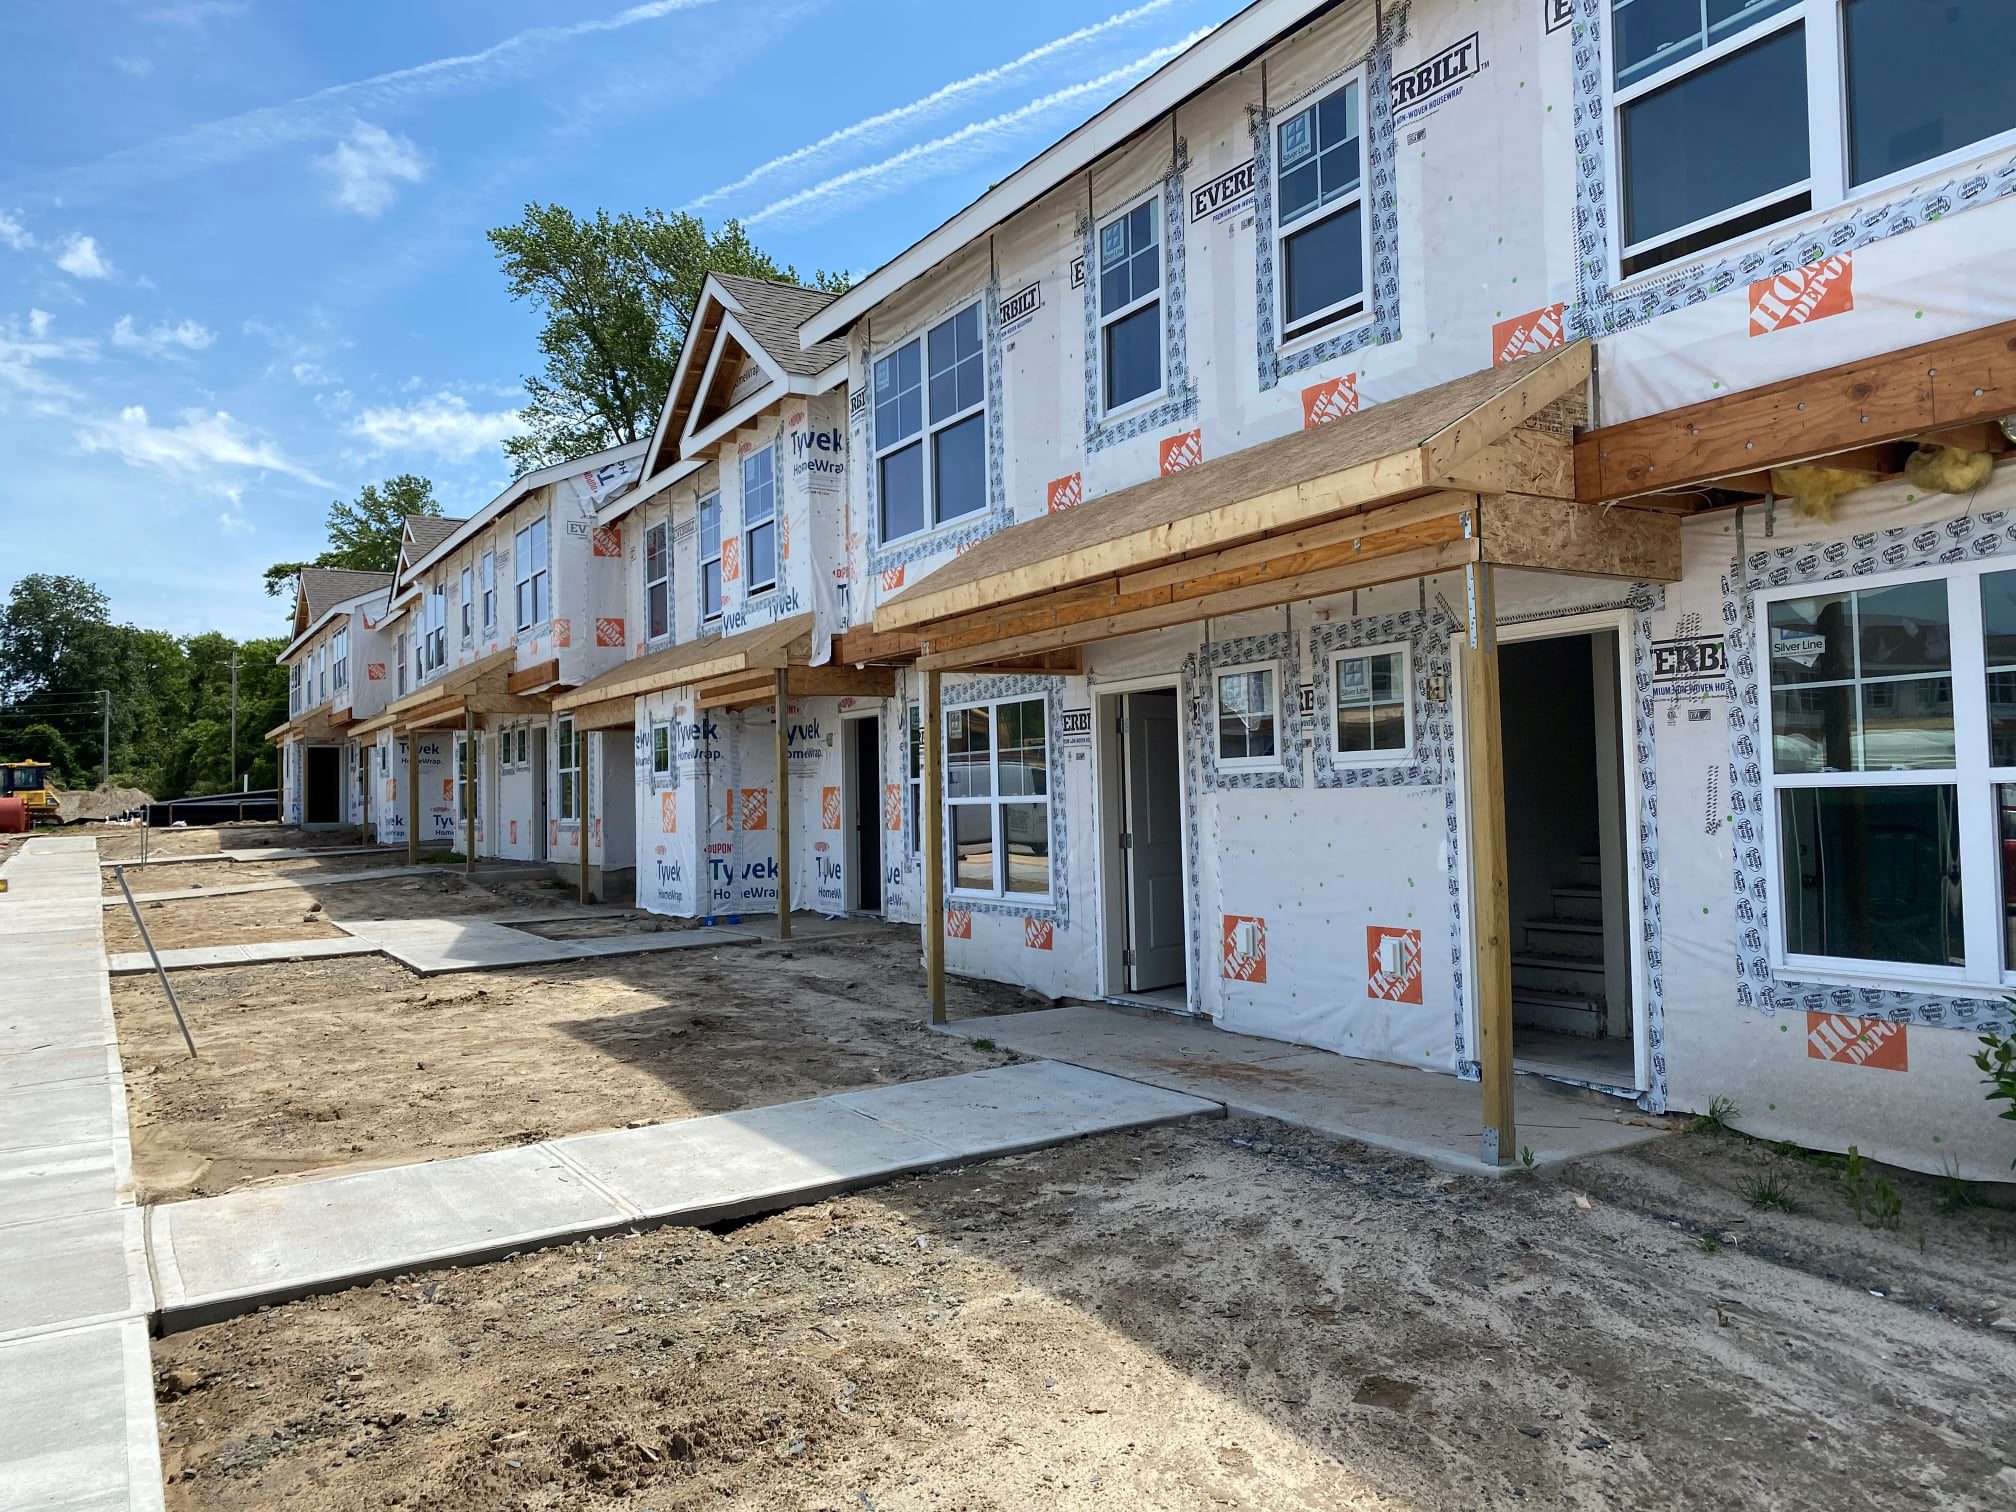 Featured image for “Council adopts economic incentives for affordable housing”